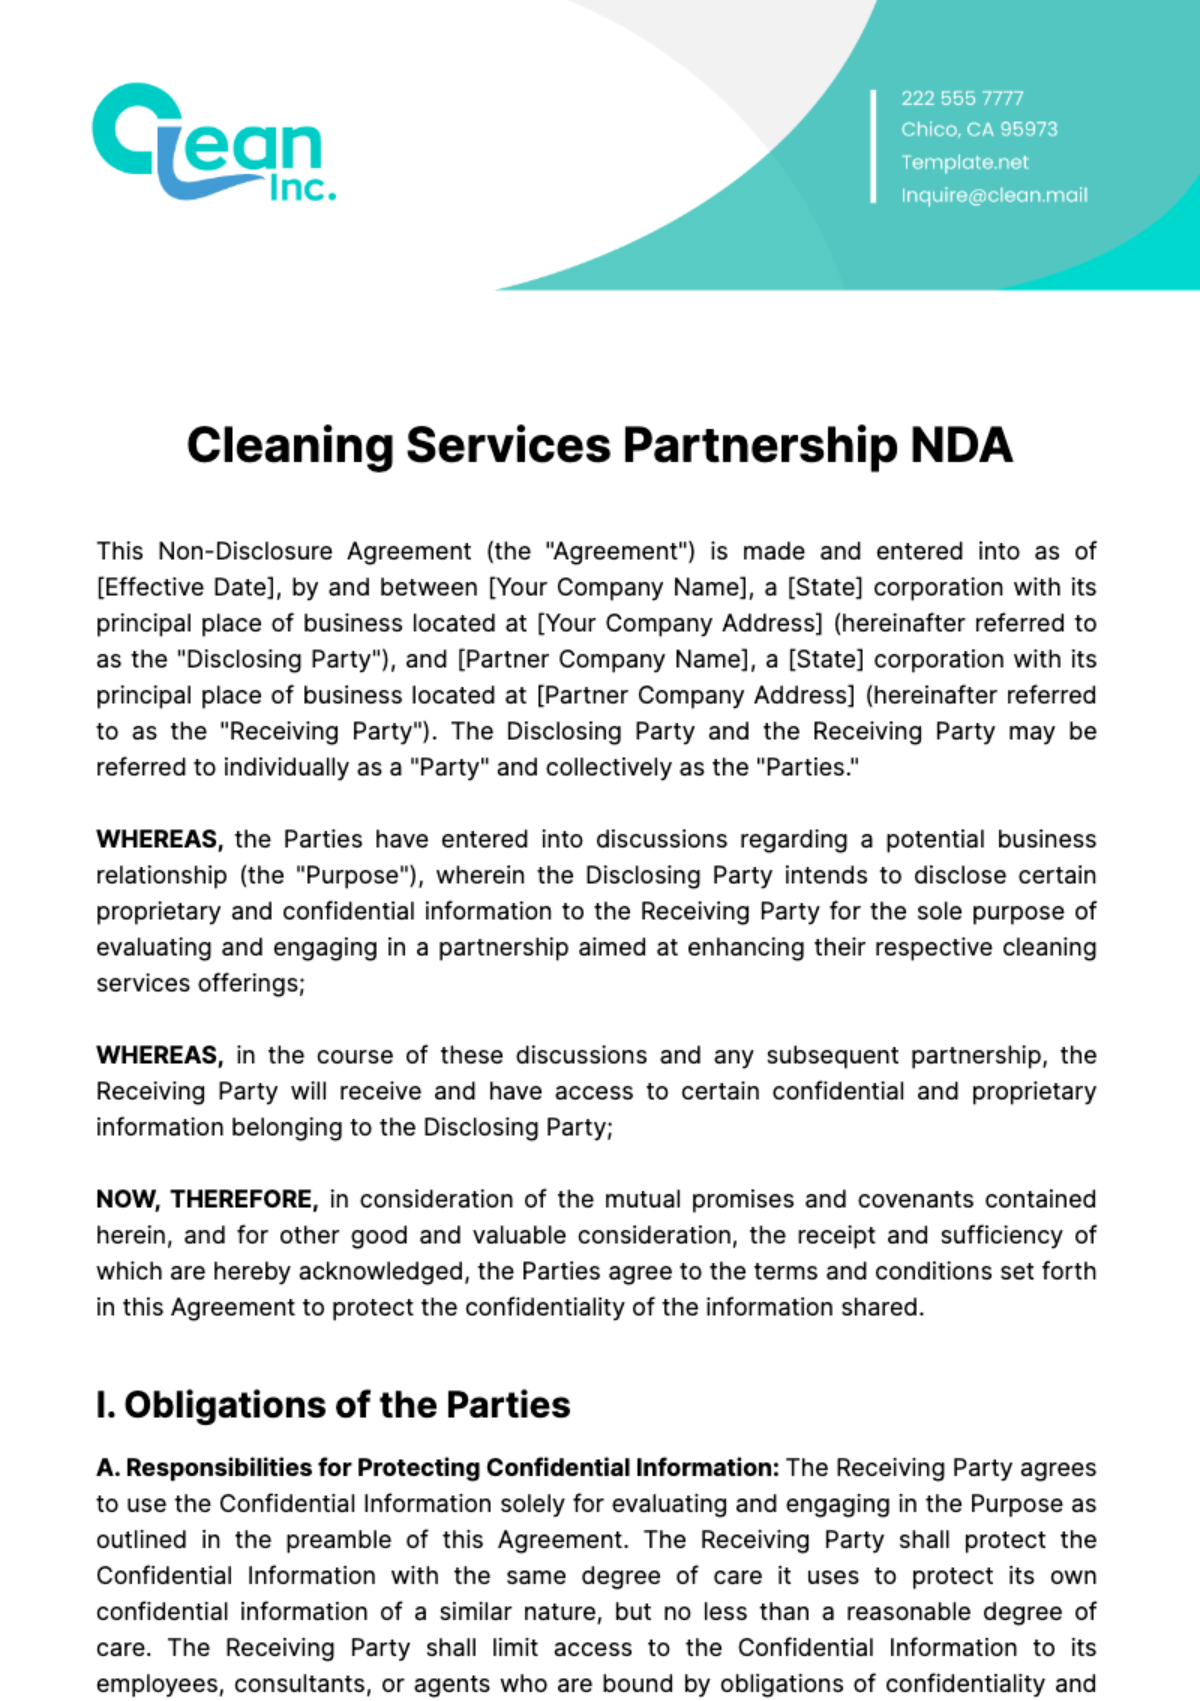 Cleaning Services Partnership NDA Template